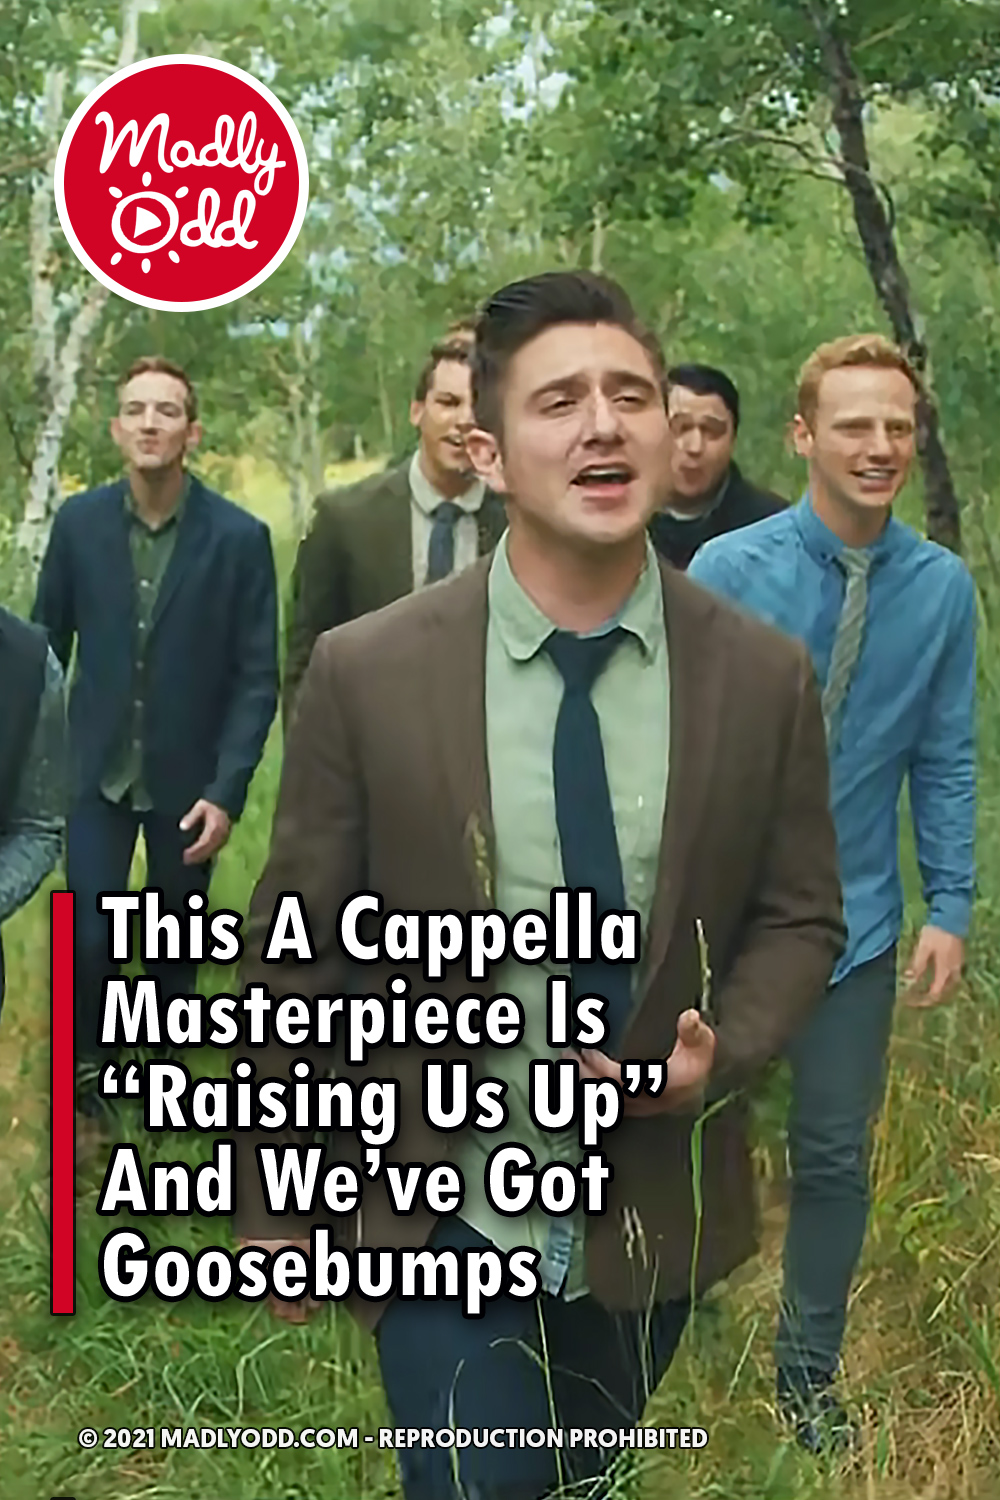 This A Cappella Masterpiece Is “Raising Us Up” And We’ve Got Goosebumps